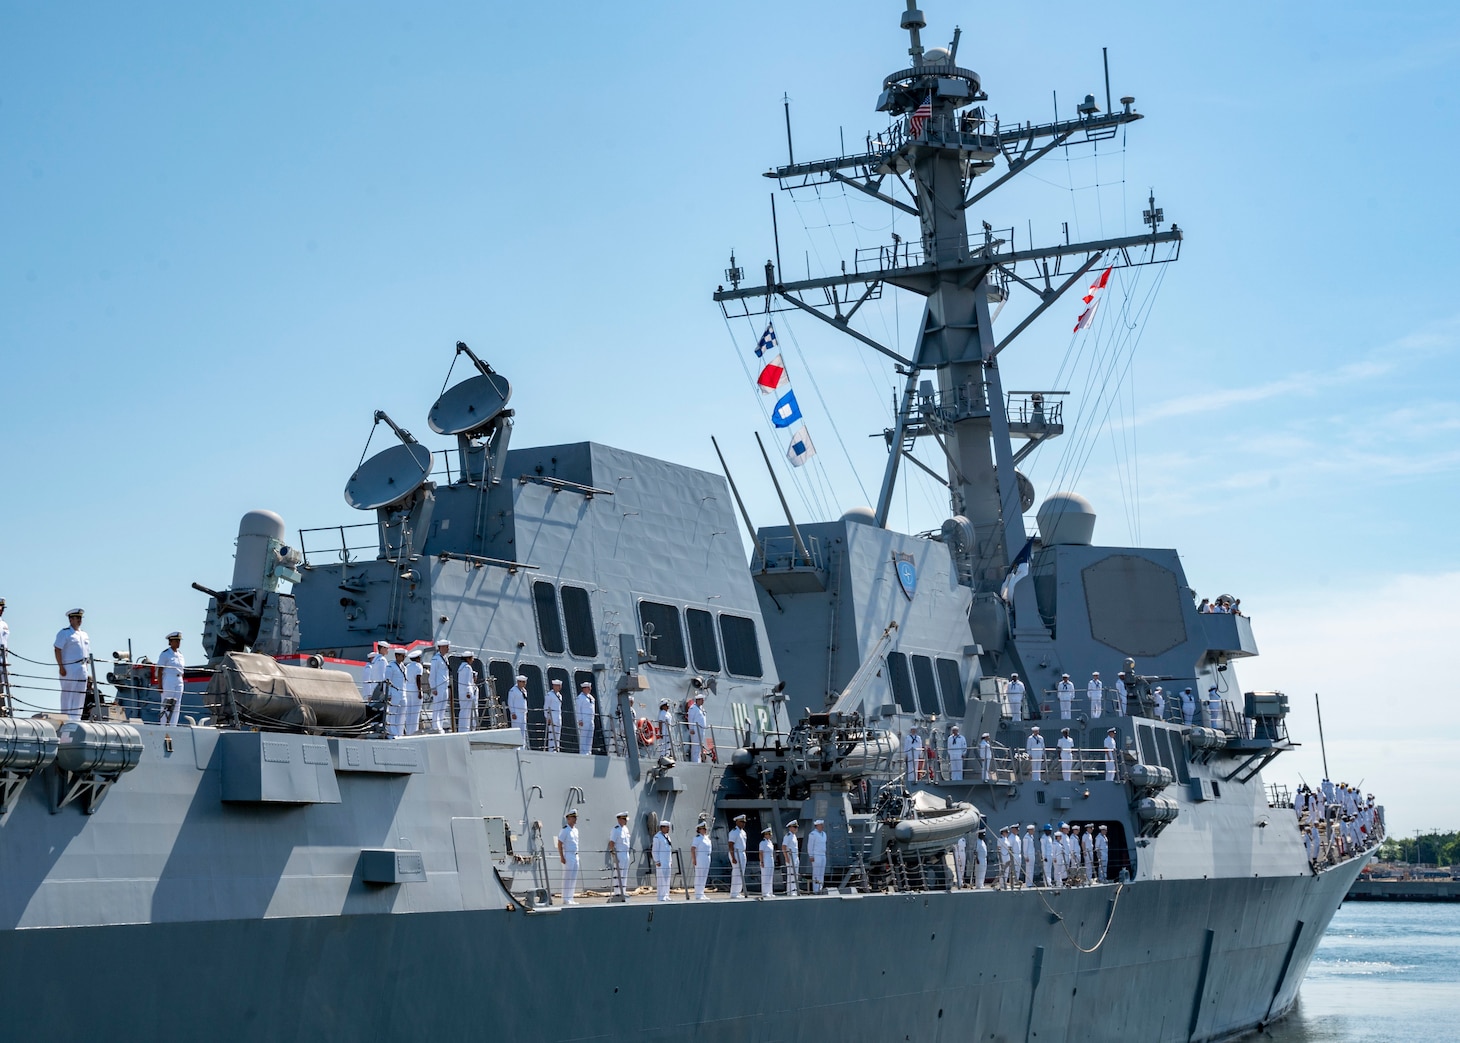 The Arleigh Burke-class guided-missile destroyer USS Forrest Sherman (DDG 98) departed on deployment from its home port of Norfolk, June 11.